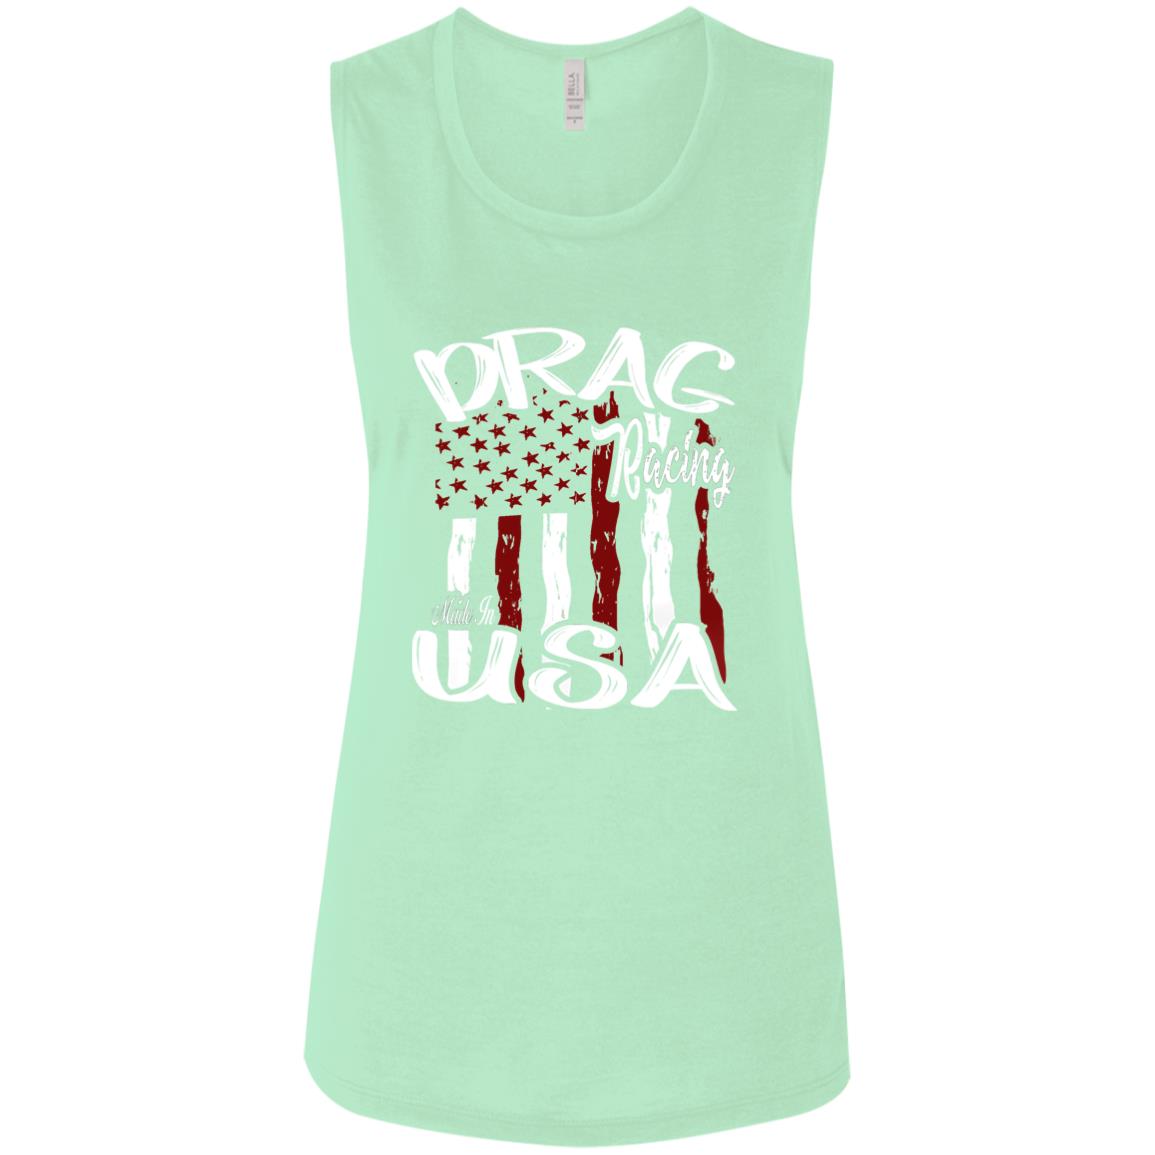 Drag Racing Made In USA Ladies' Flowy Muscle Tank